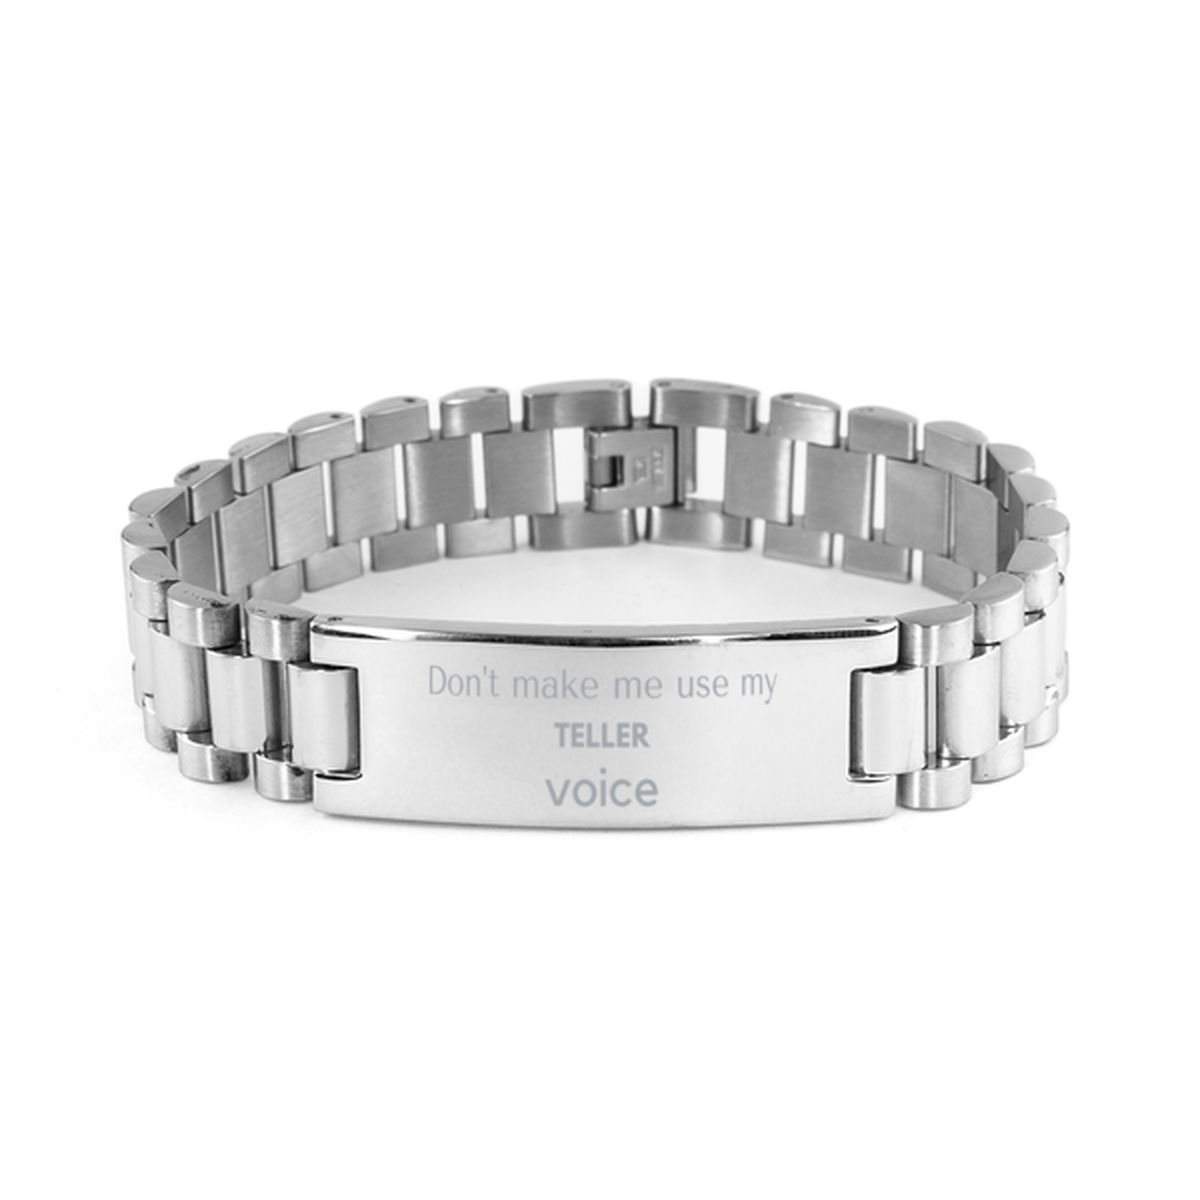 Don't make me use my Teller voice, Sarcasm Teller Gifts, Christmas Teller Ladder Stainless Steel Bracelet Birthday Unique Gifts For Teller Coworkers, Men, Women, Colleague, Friends